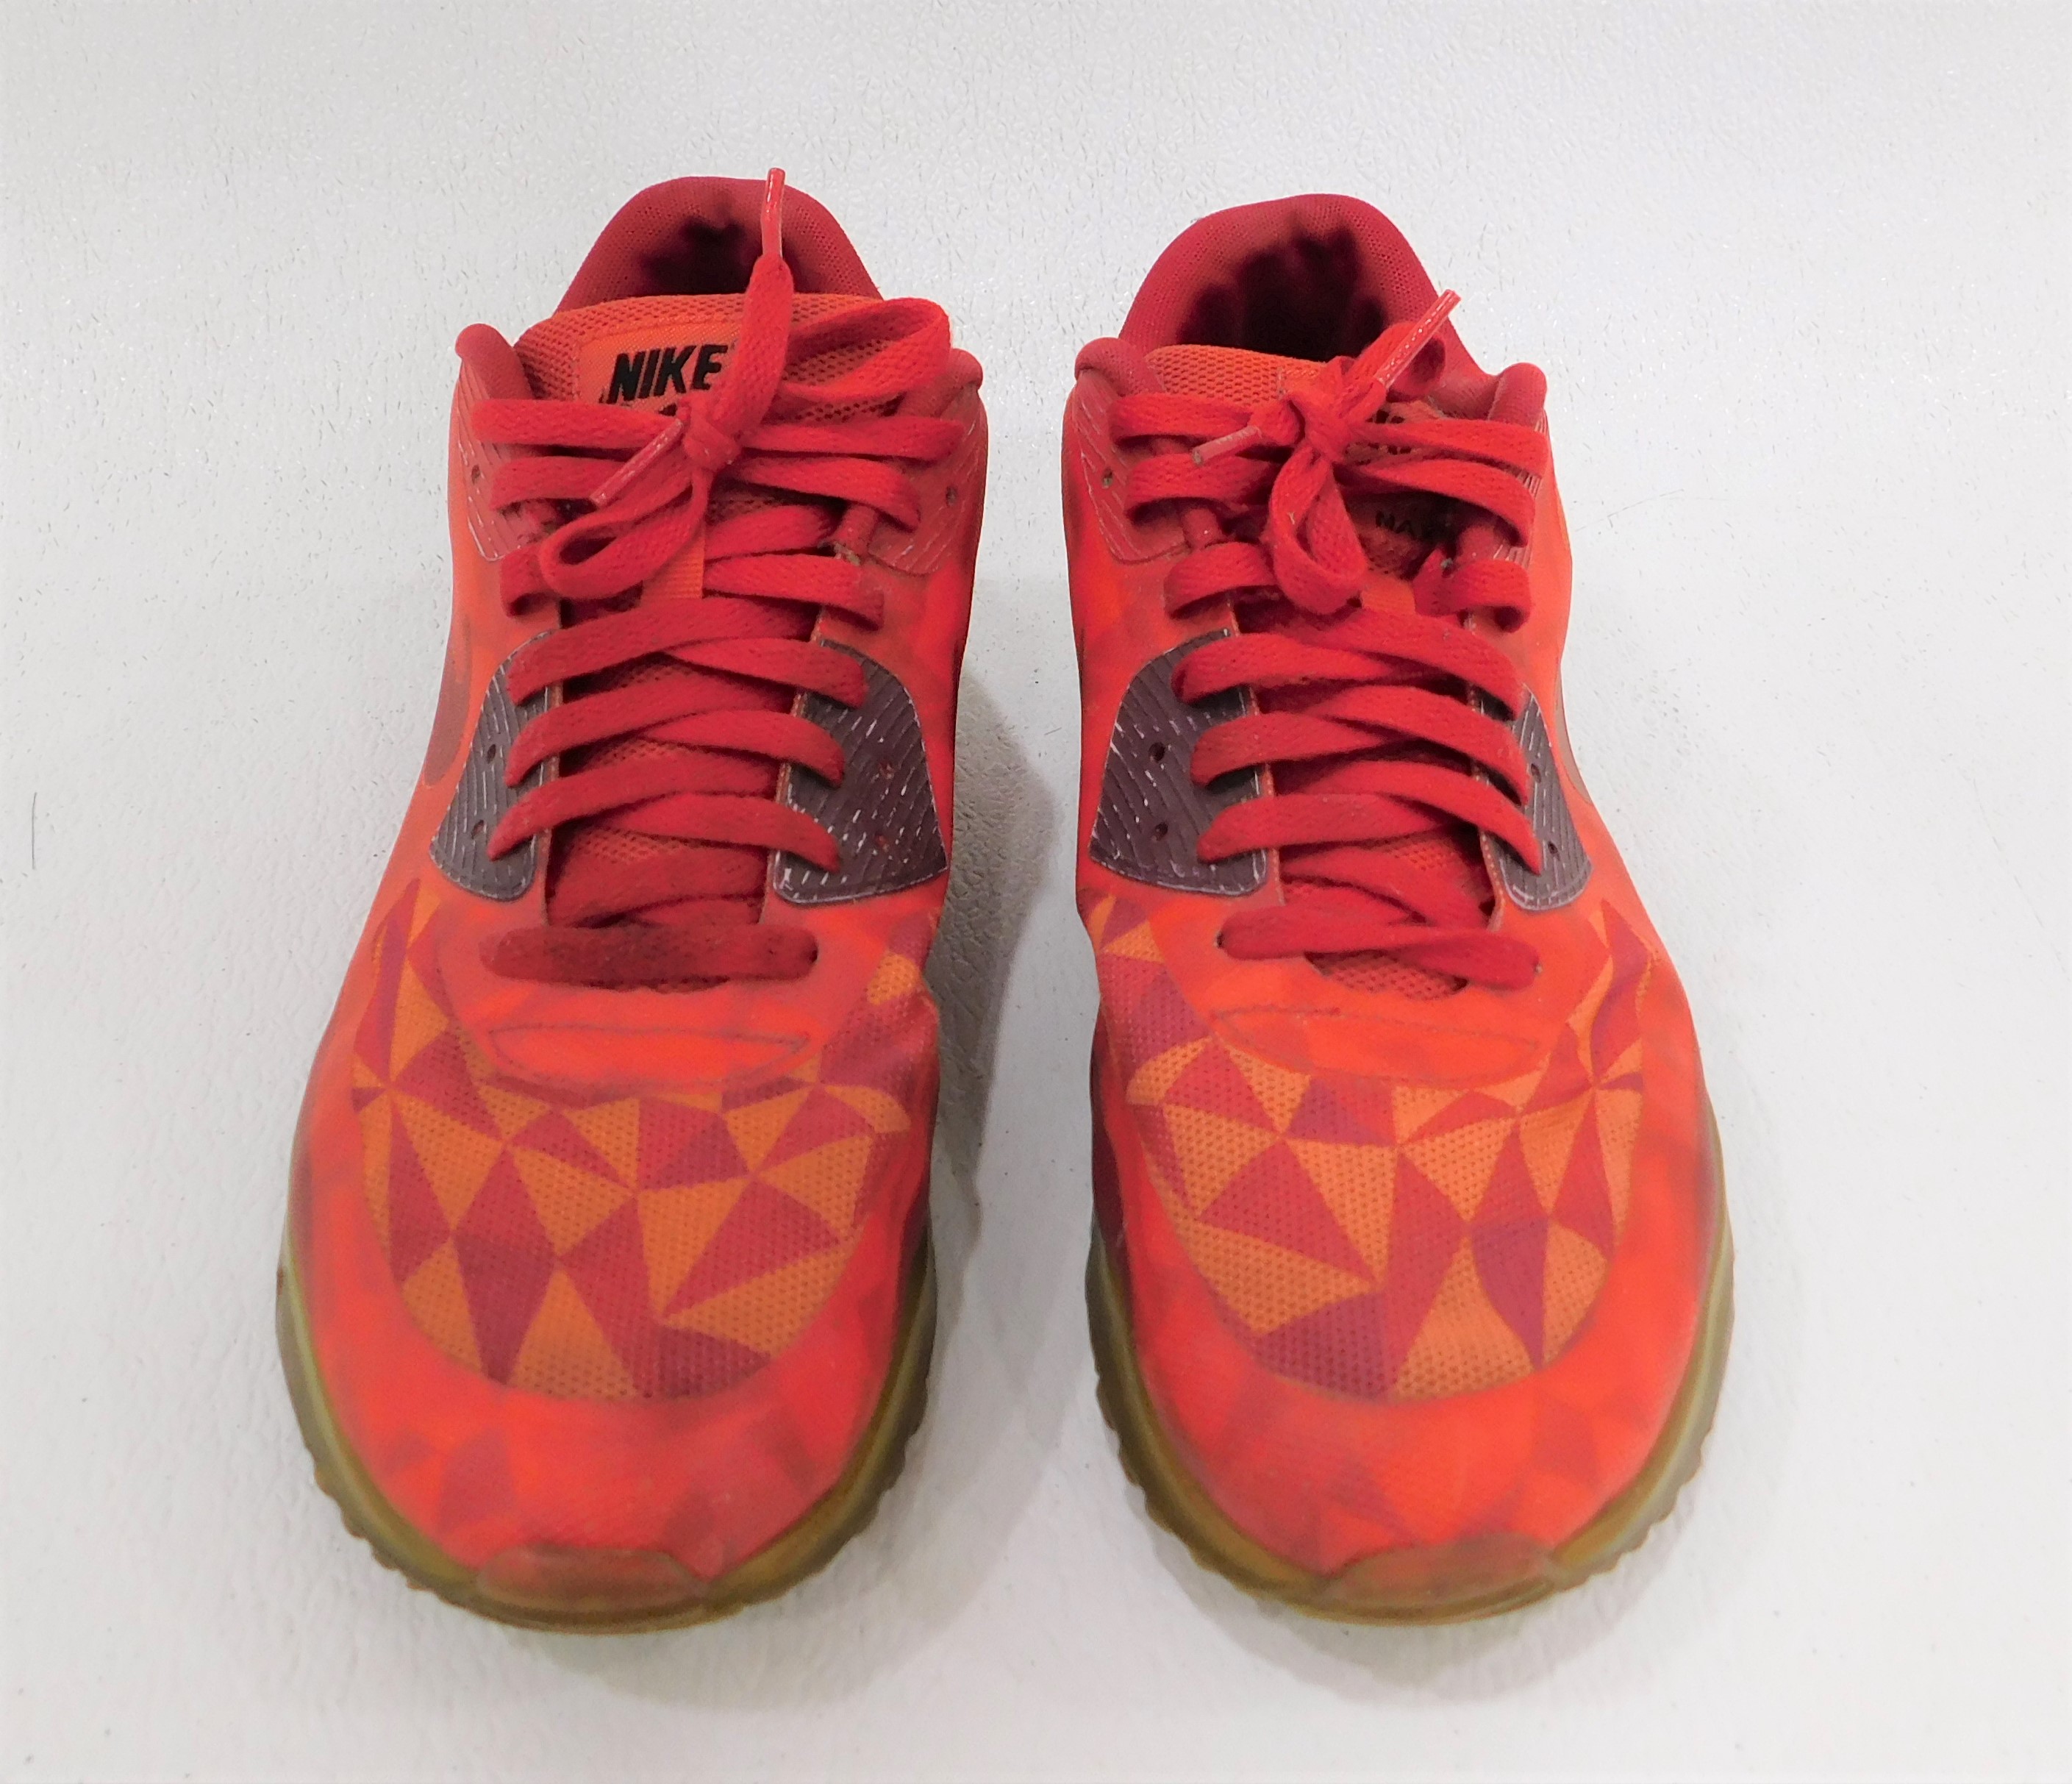 Buy the Air Max 90 Gym Red Shoe Size 11.5 |